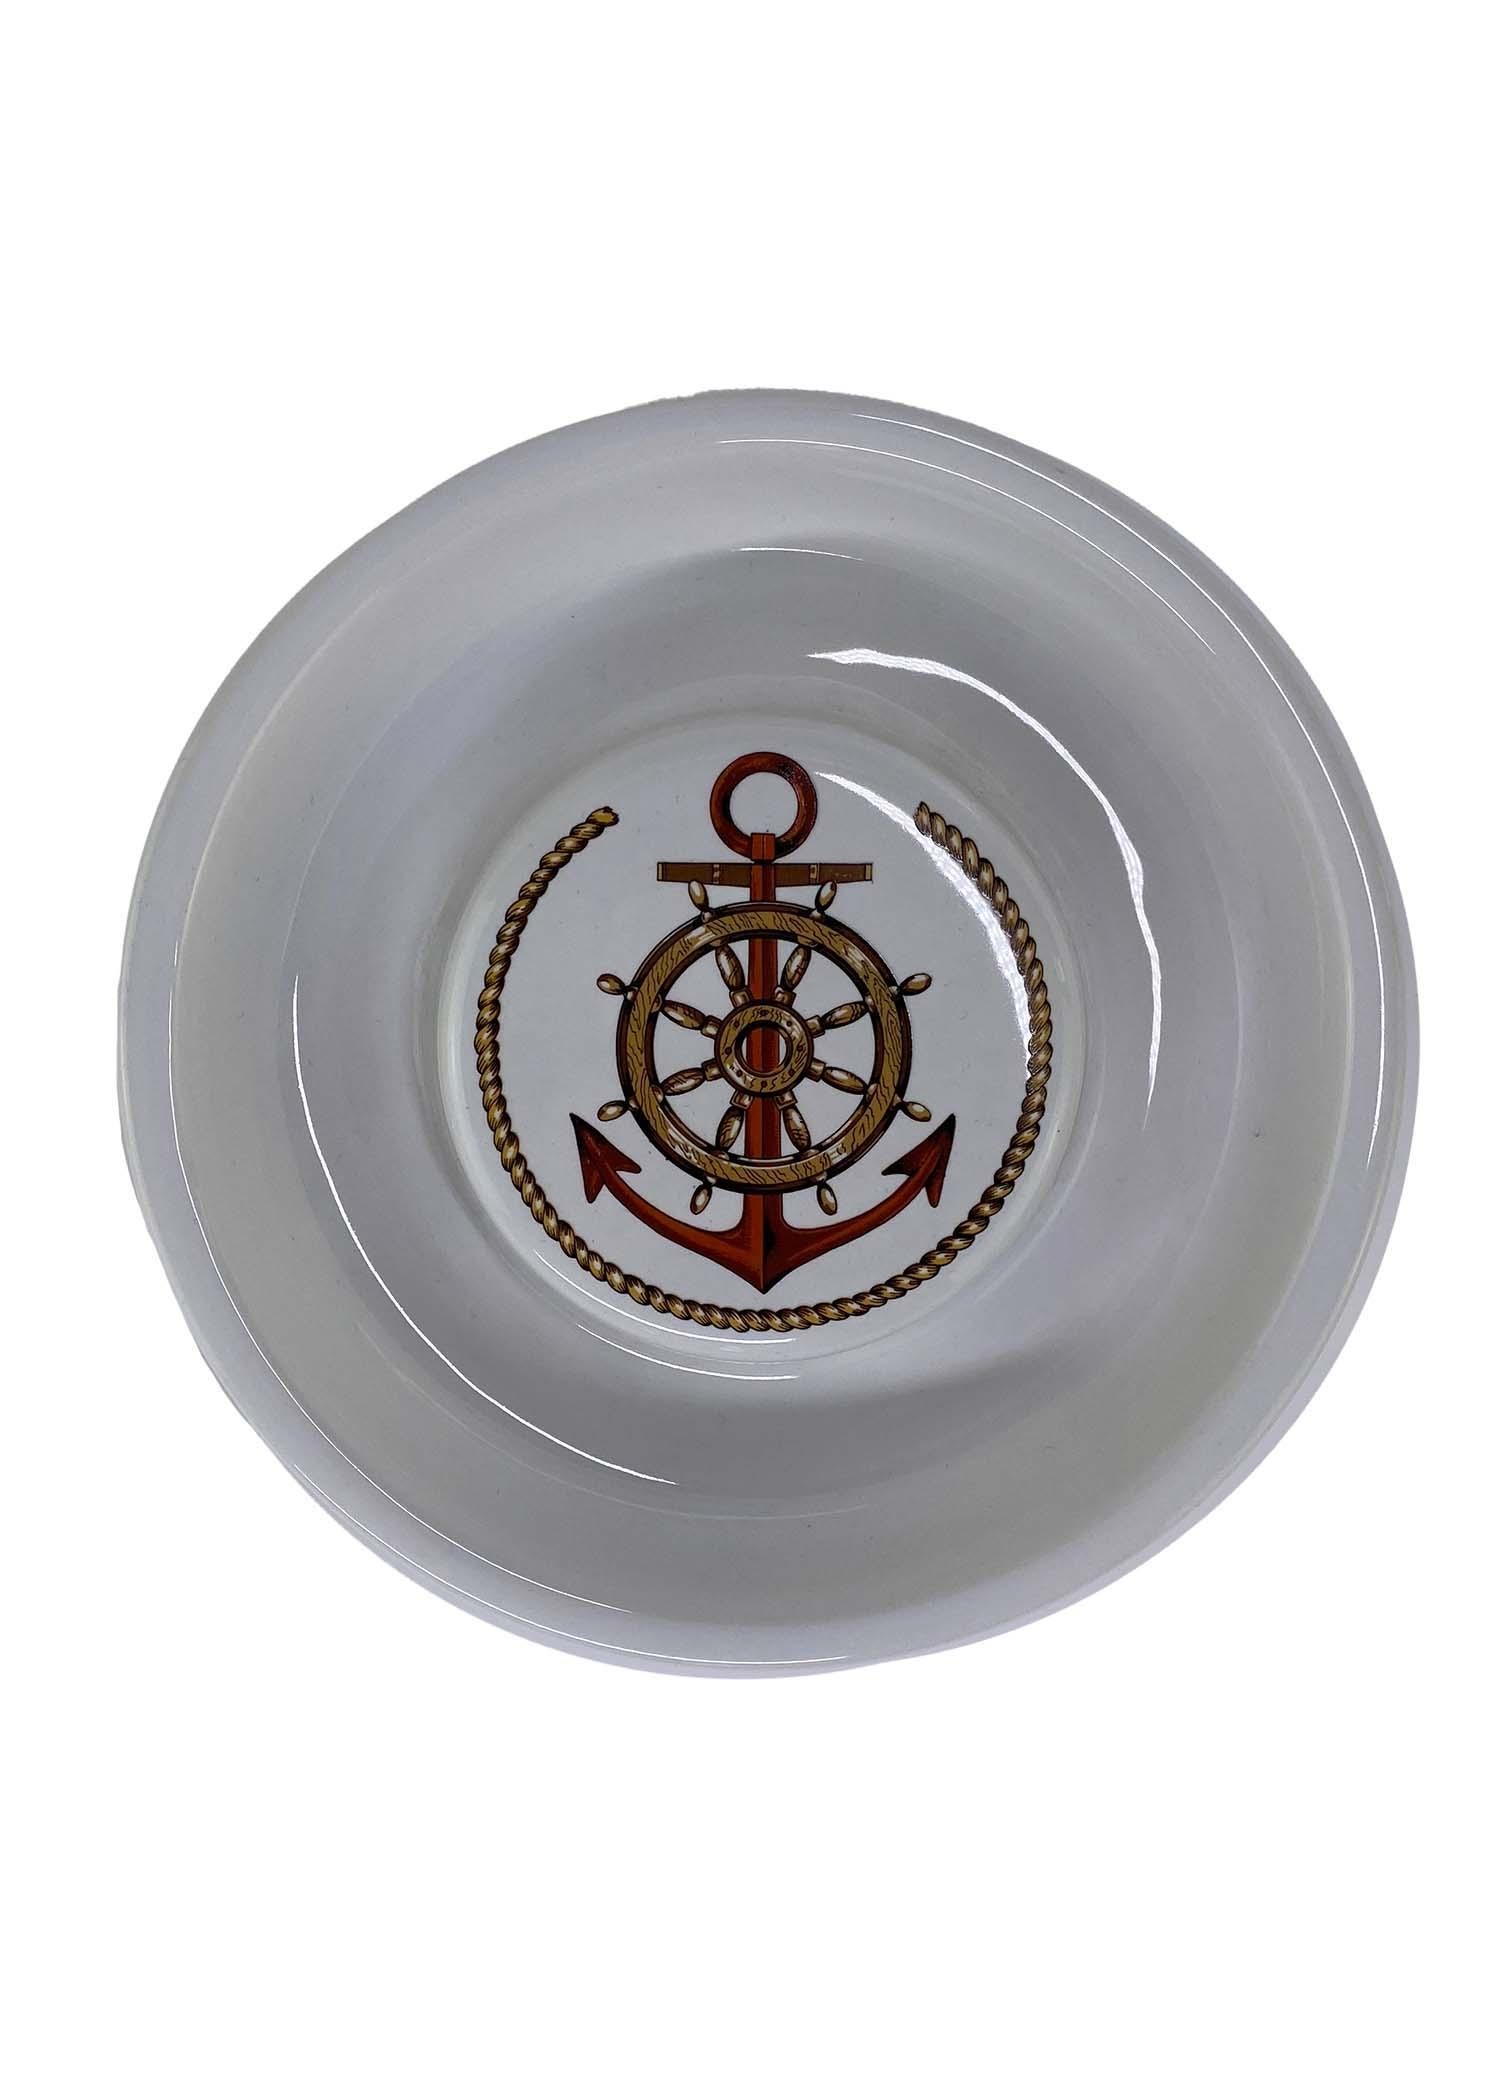 TheRealList presents: a rare piece of vintage Gucci home decor. This porcelain ashtray has never been used, making it a perfect gift for any Gucci lover to display. The top piece is printed with two 'Gucci' logos and eight nautical flags. The bottom